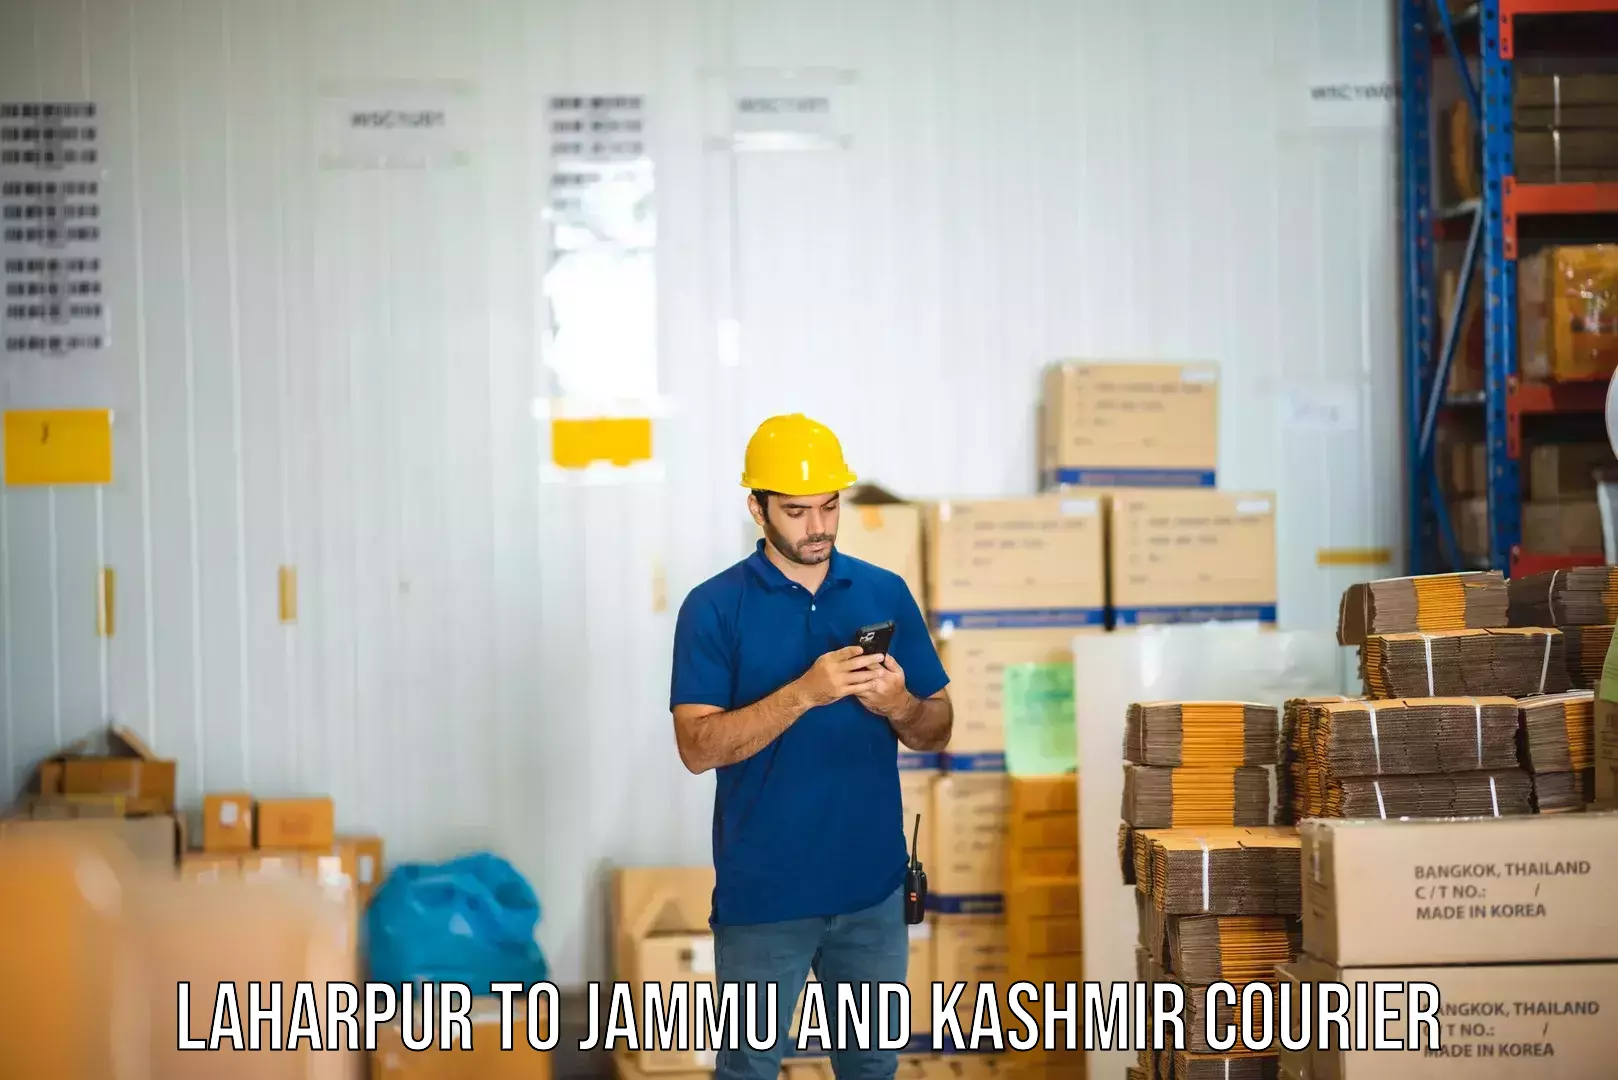 Nationwide shipping services Laharpur to IIT Jammu